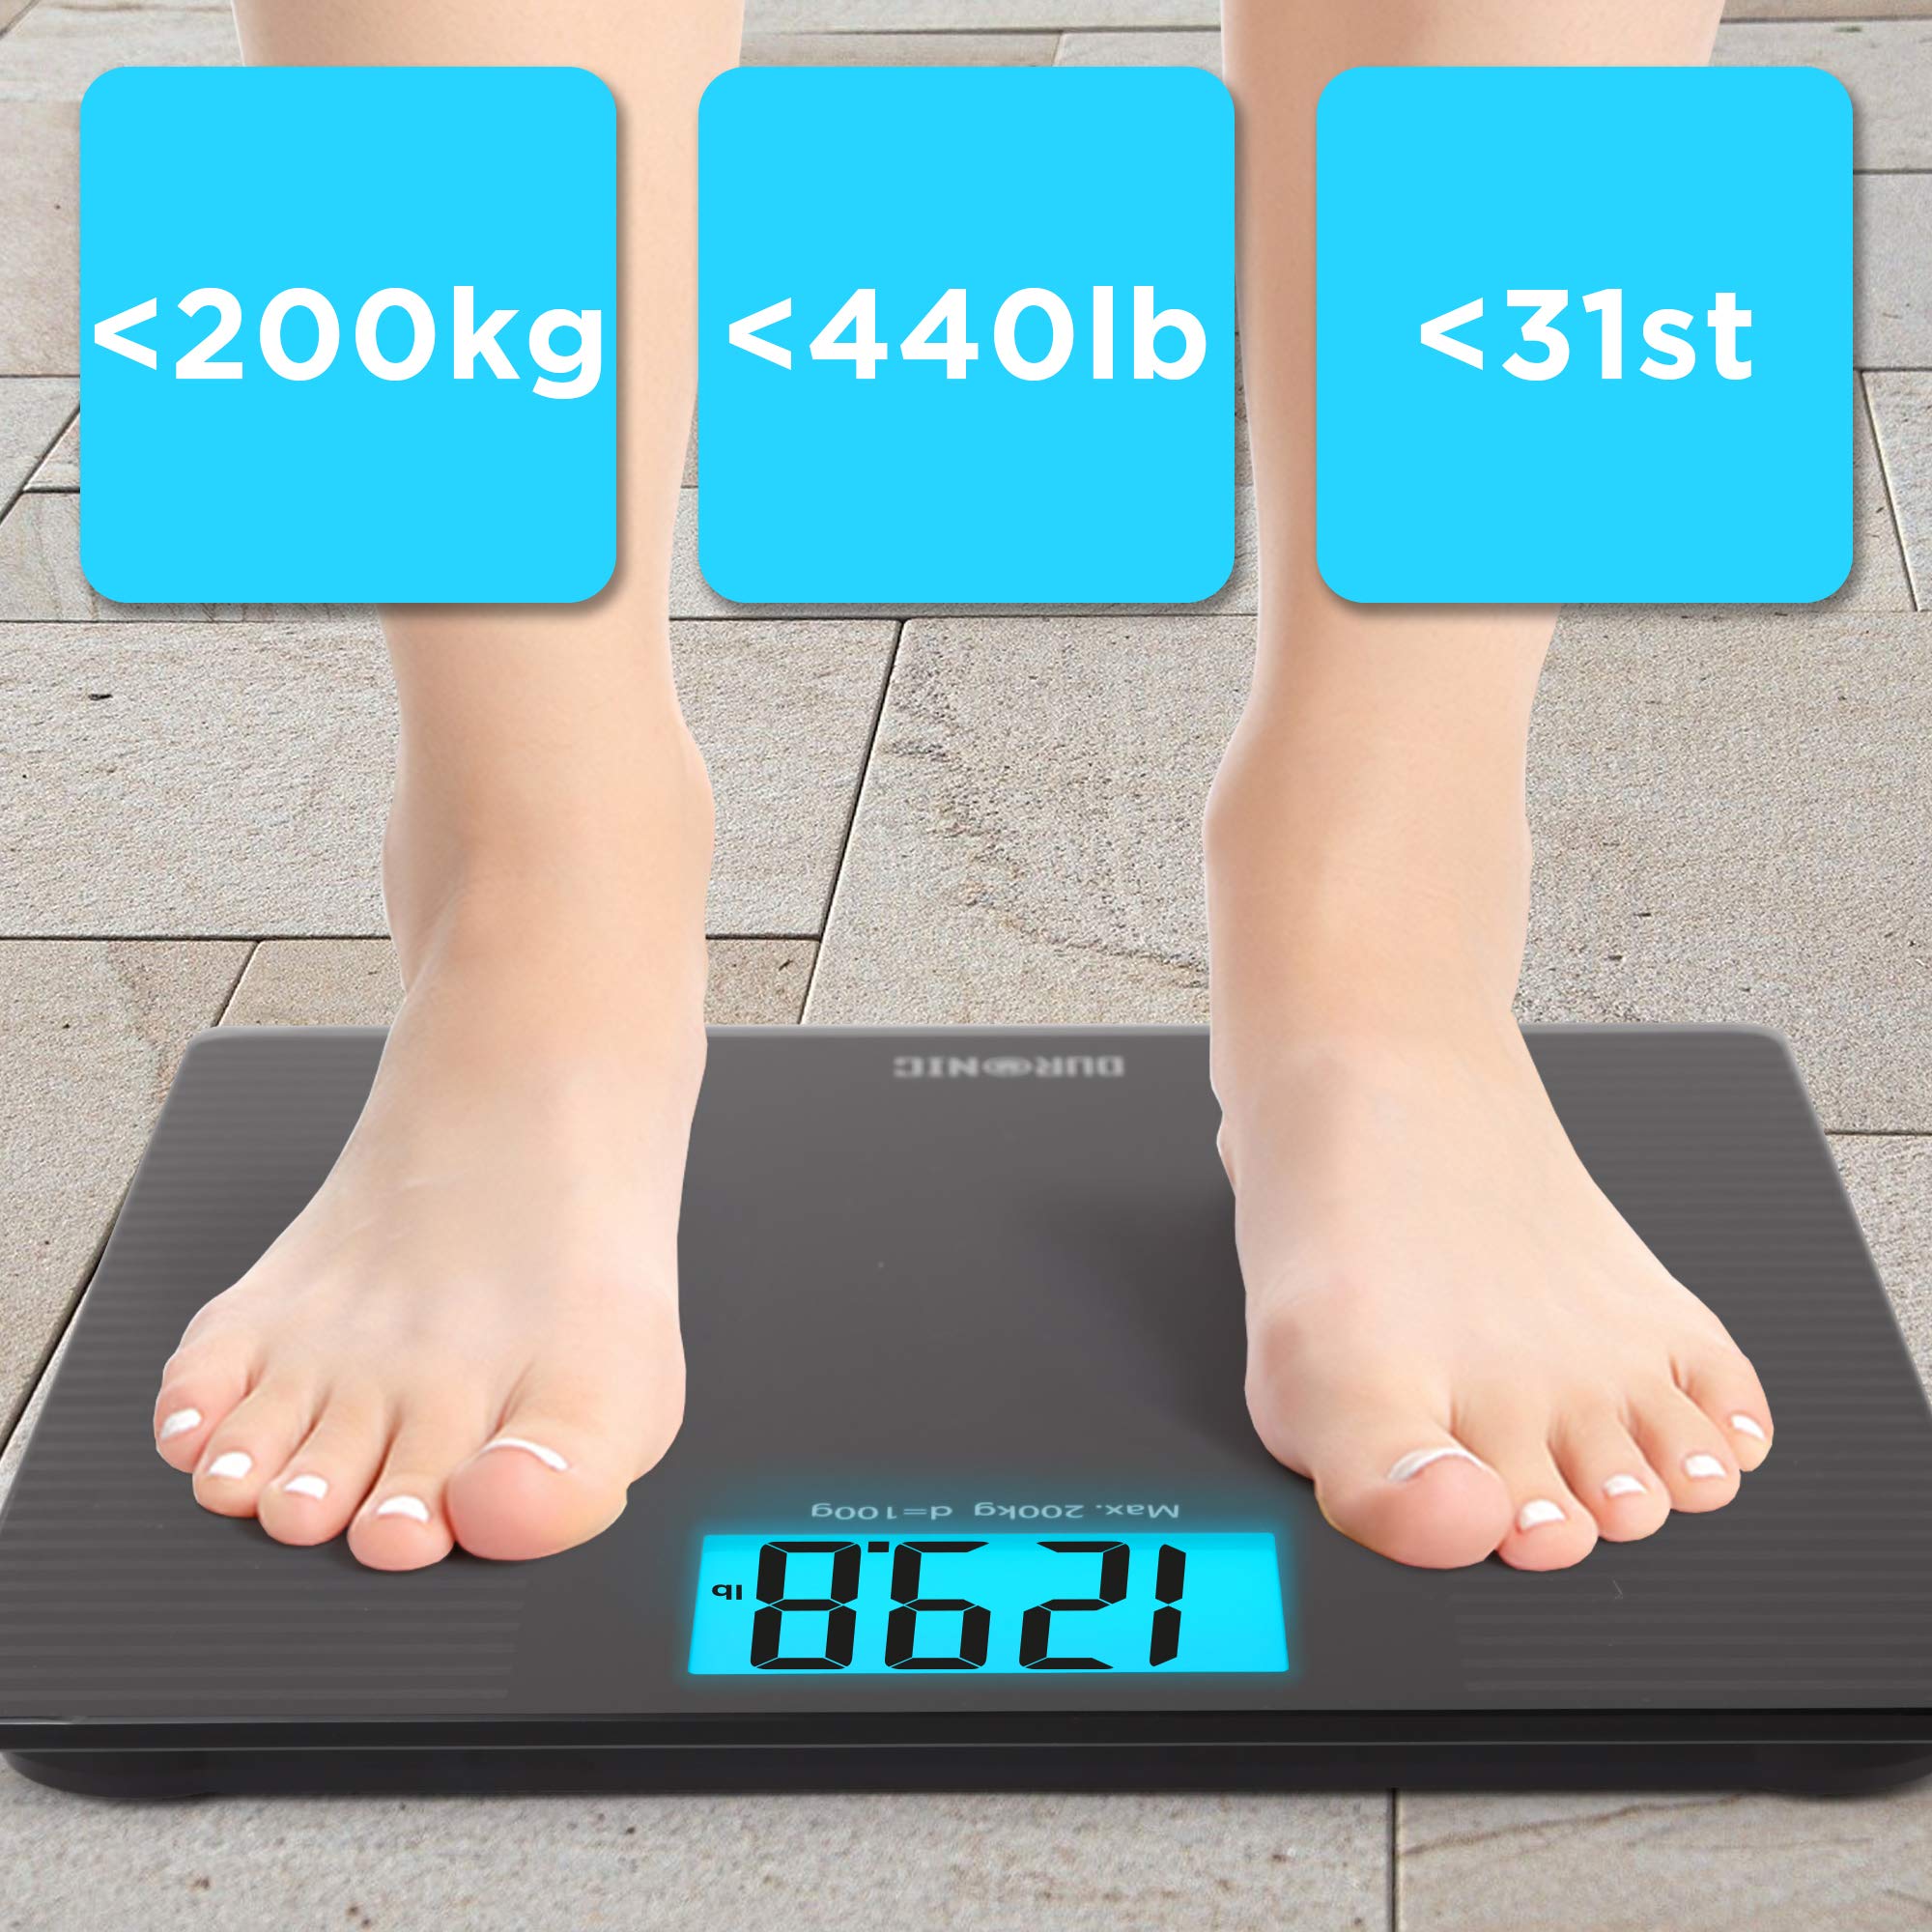 Duronic Body Scales BS203 | Measures Body Weight in Kilograms, Pounds and Stones | Black Non-Slip Design | Step-On Activation Bathroom Scales | Precision Sensors | XL Digital Display | 200kg Capacity